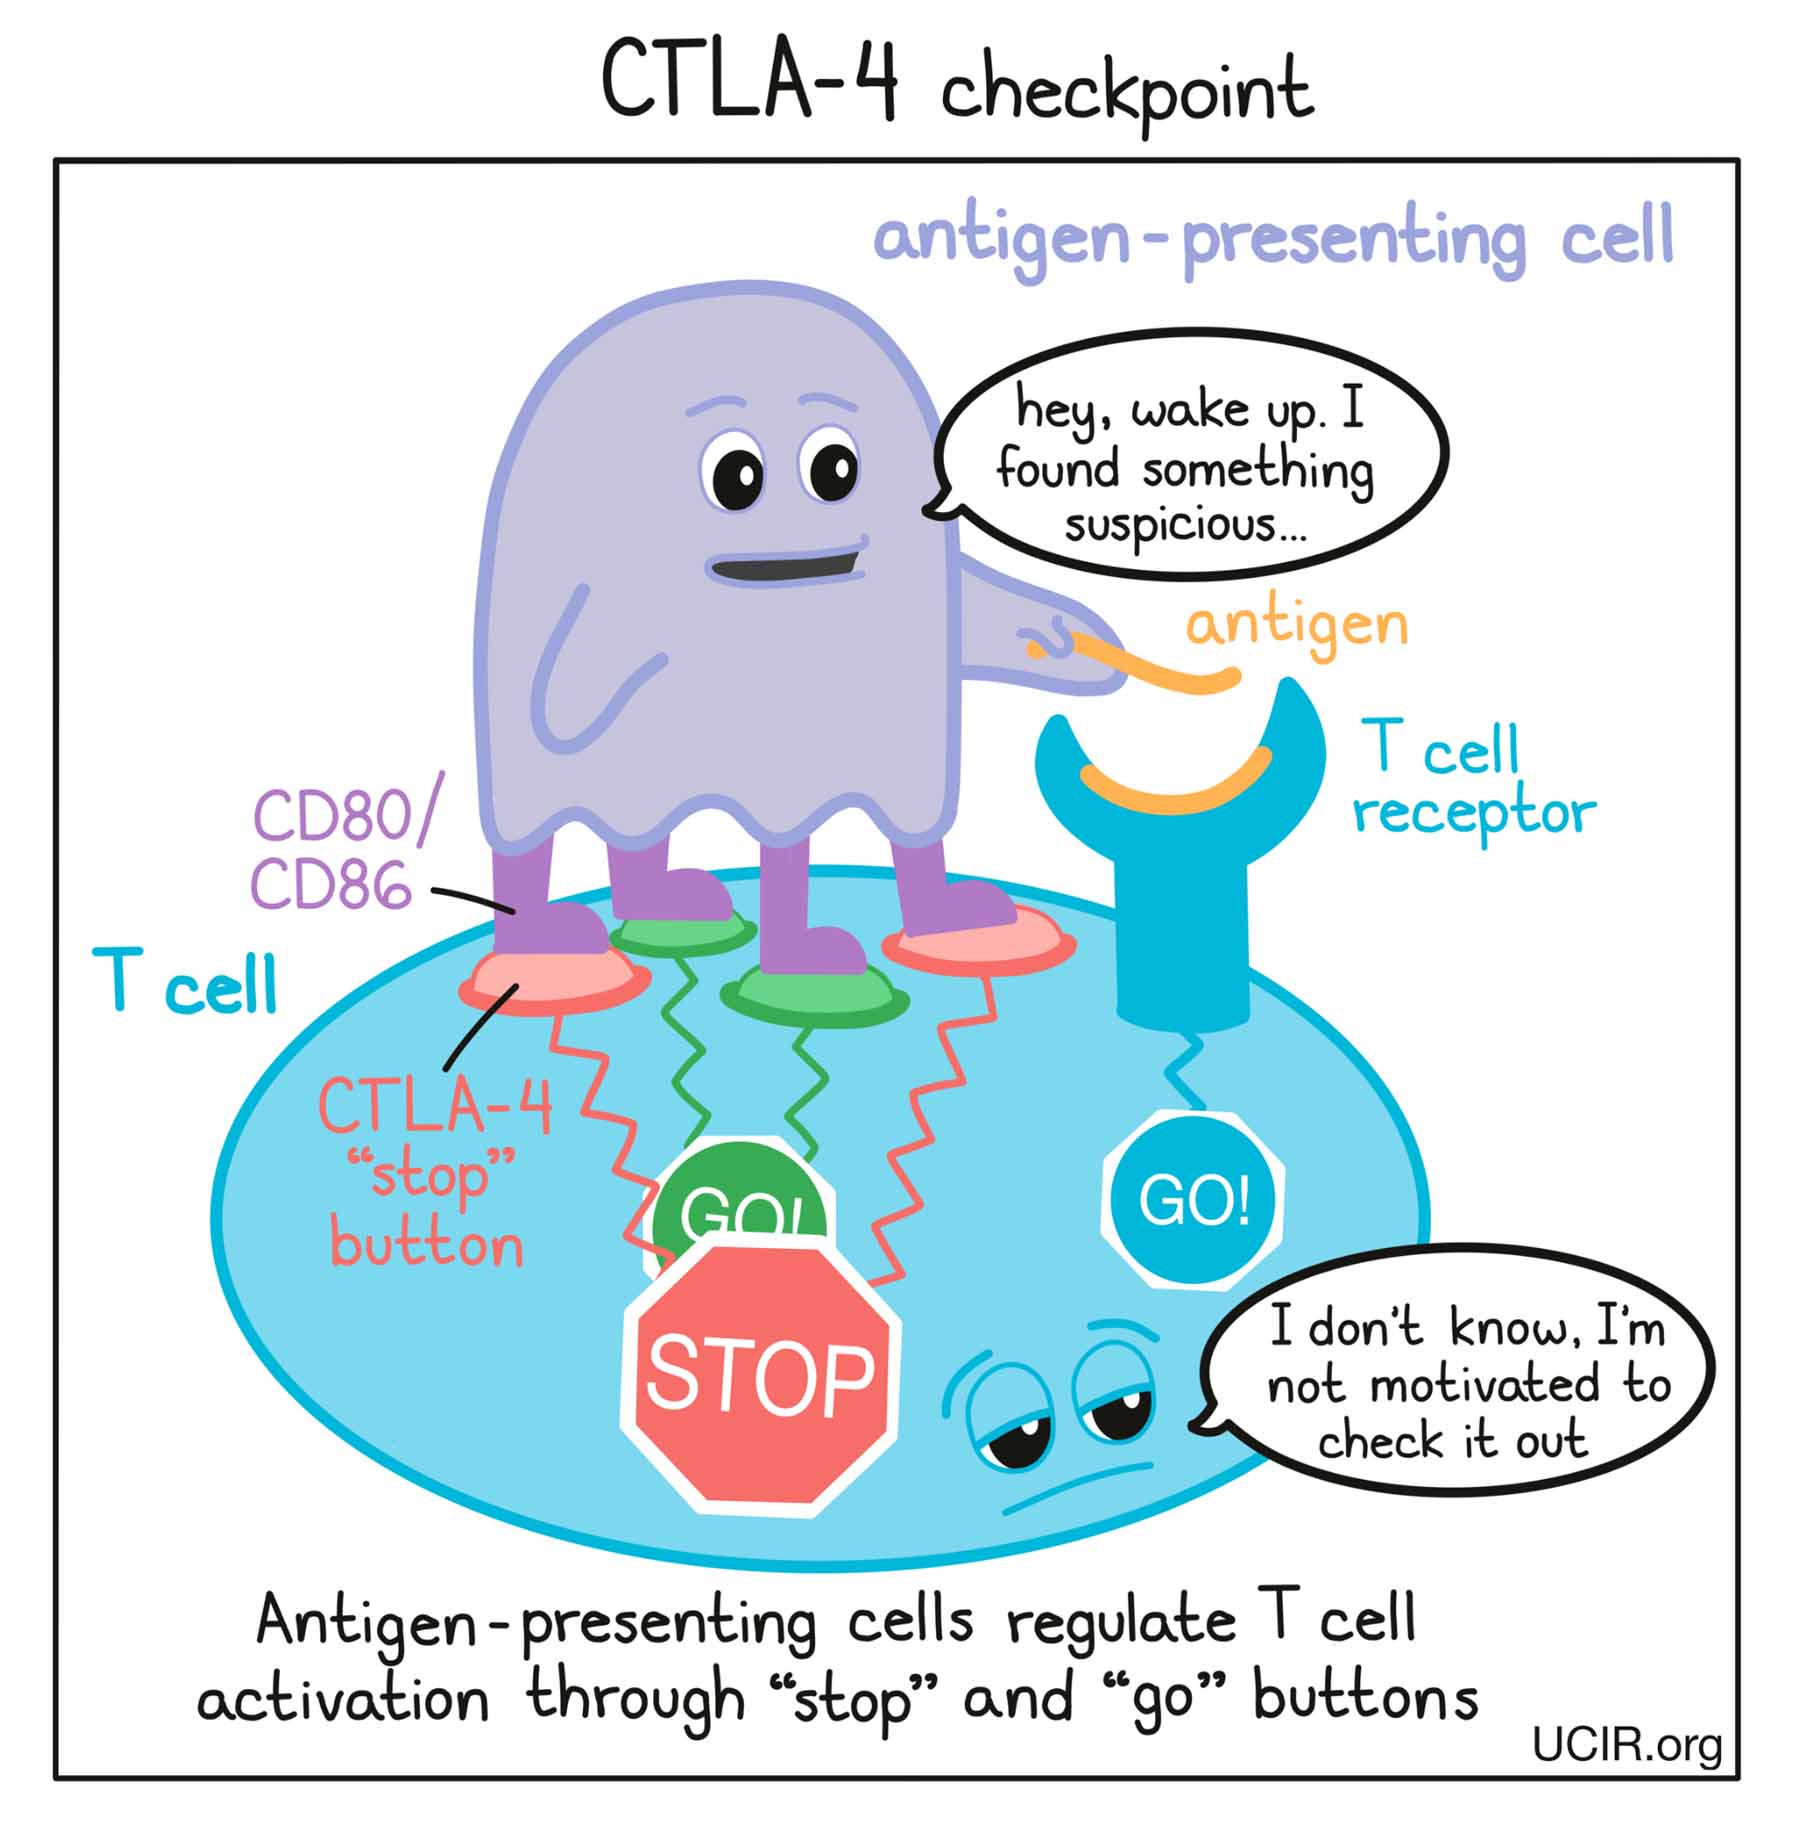 Cartoon that shows how CTLA-4 checkpoint works (multiple images)